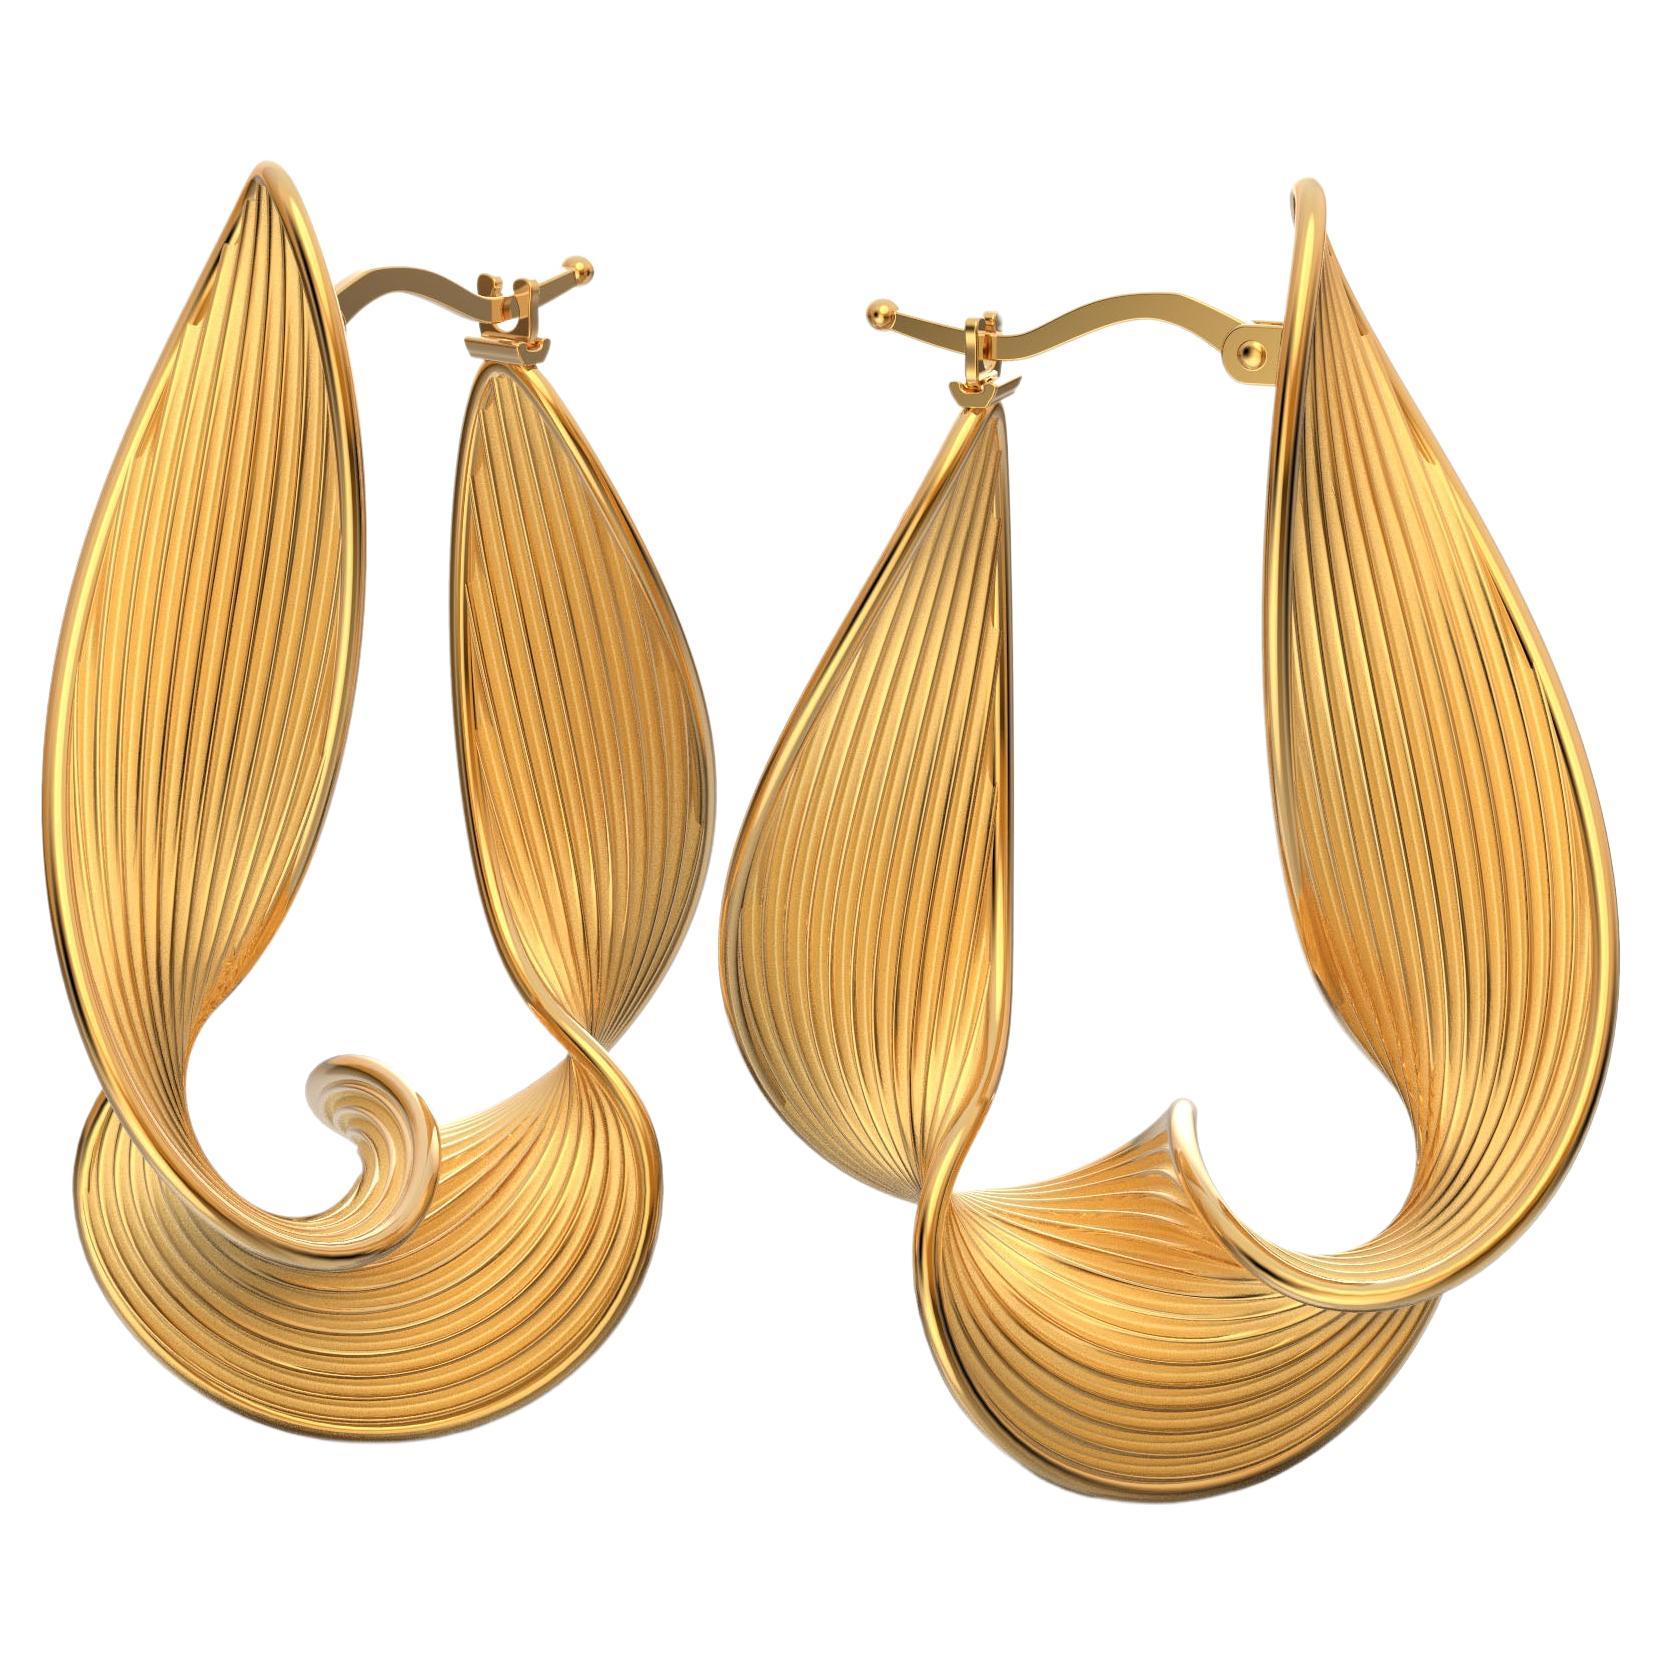 Stunning 18k Gold Twisted Hoop Earrings by Oltremare Gioielli Italian Jewelry